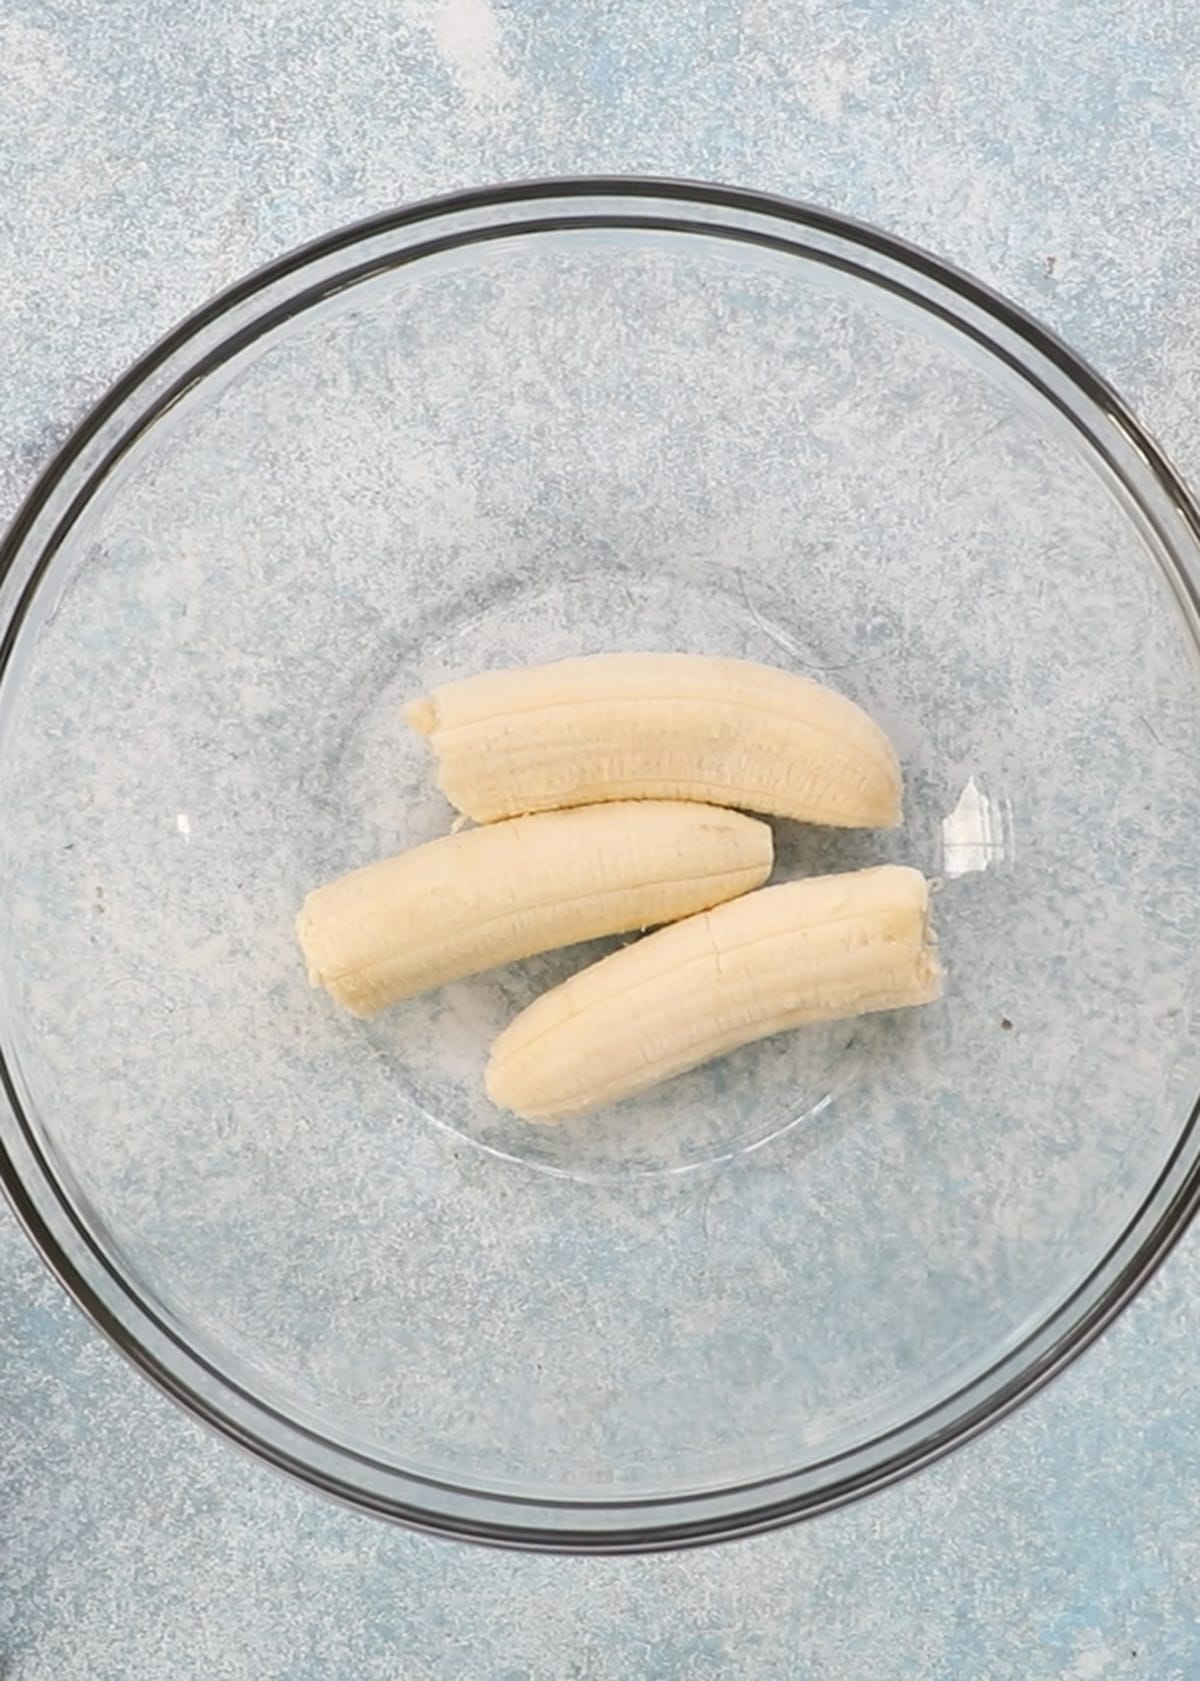 3 peeled bananas in a glass bowl.